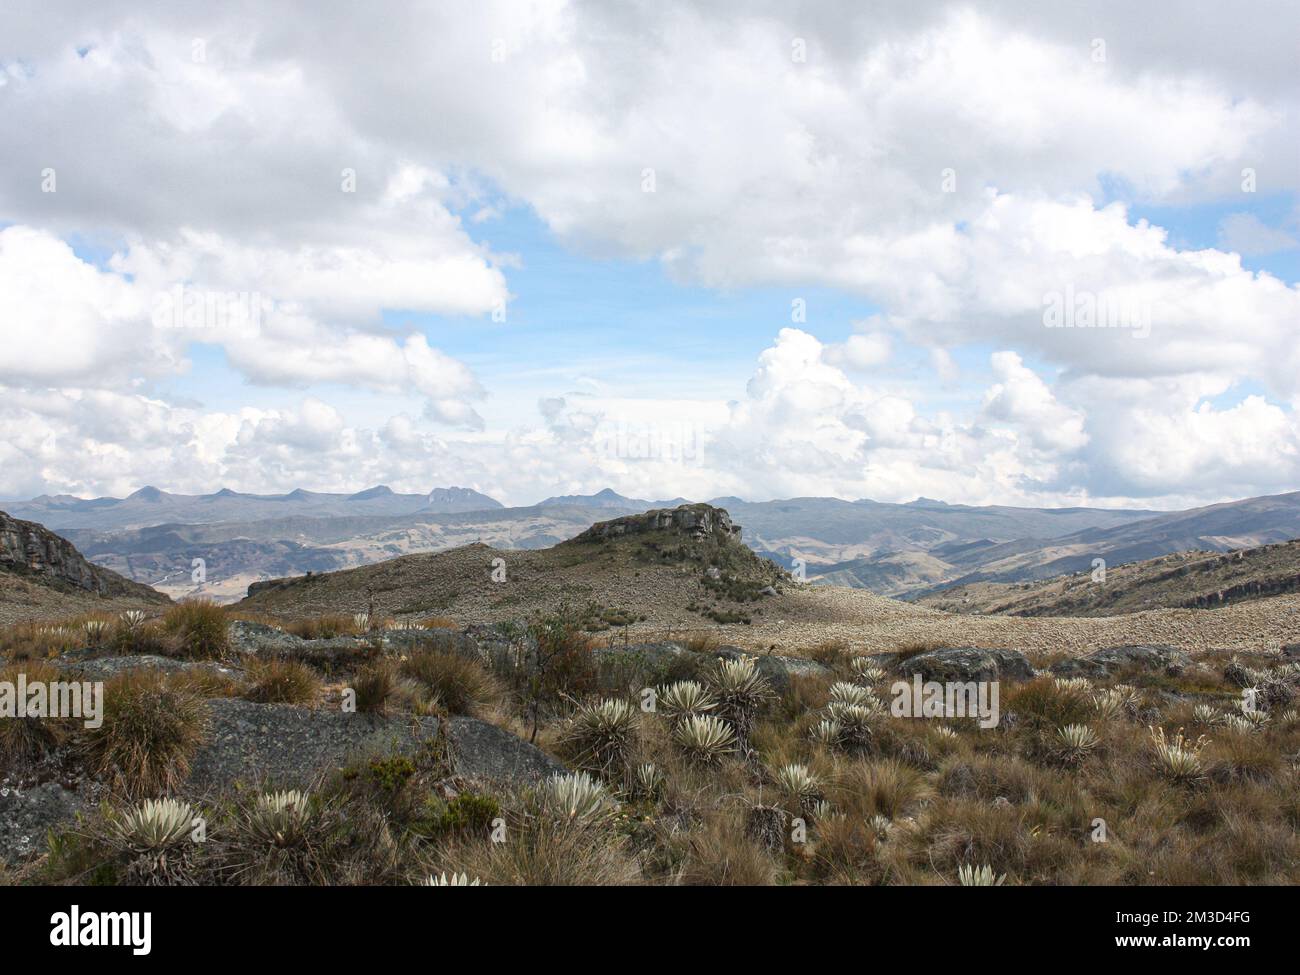 Sumapaz Paramo's Landscape near Bogot. Colombia, with endemic plant 'Frailejones' rock hills and the Andes Mountains with blue sky behind. Stock Photo